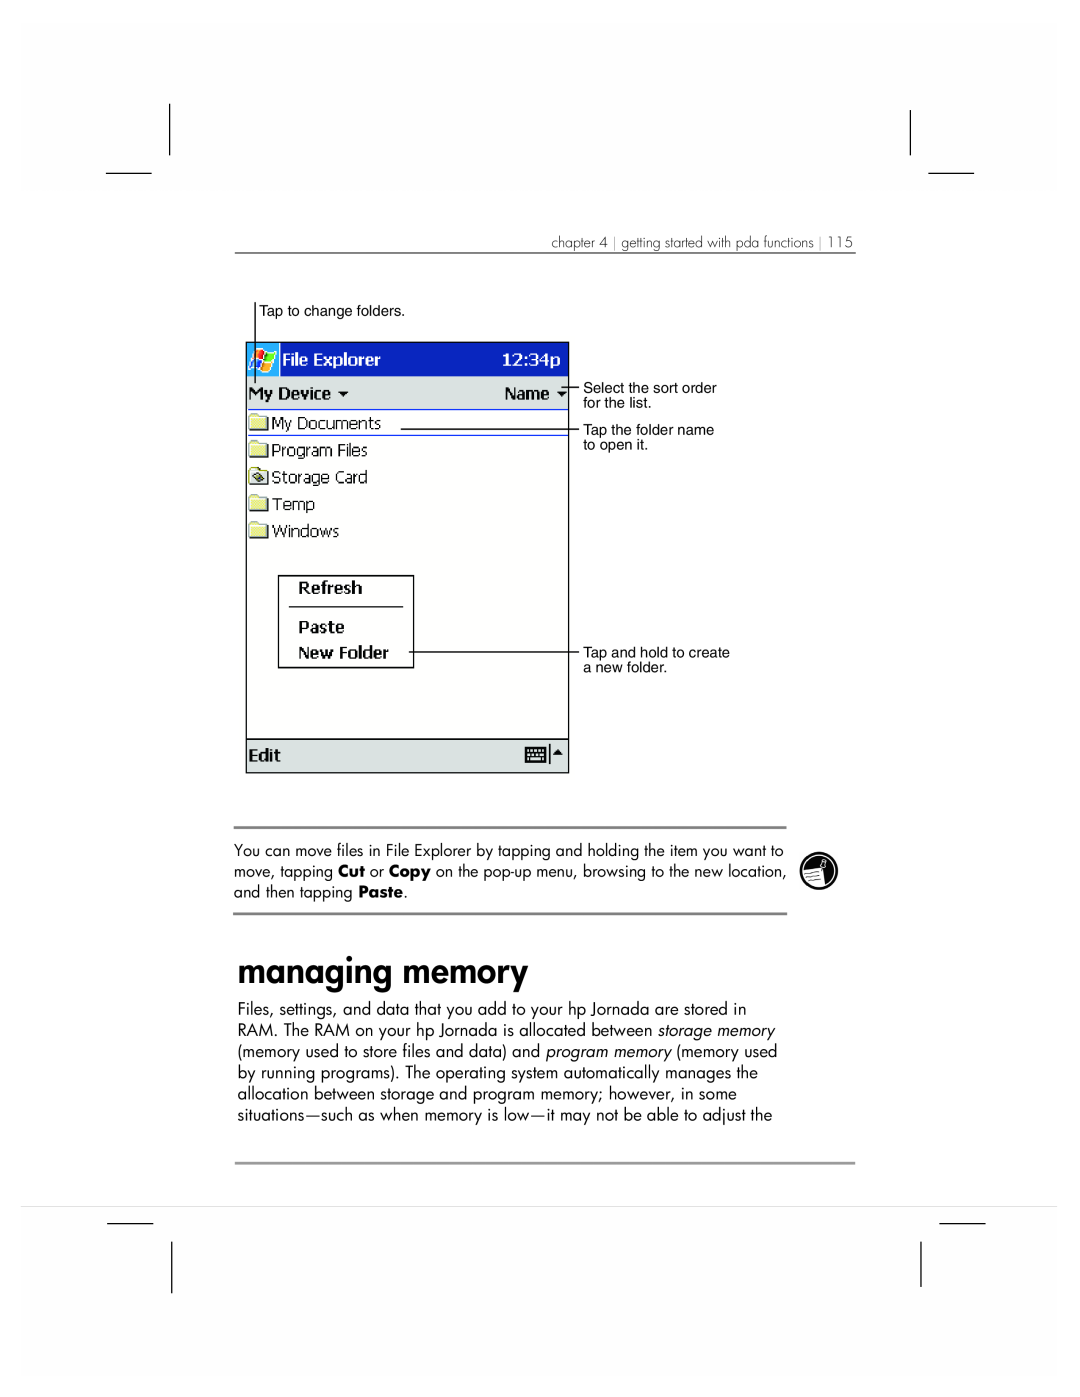 HP 920 manual managing memory, Tap to change folders Select the sort order for the list 